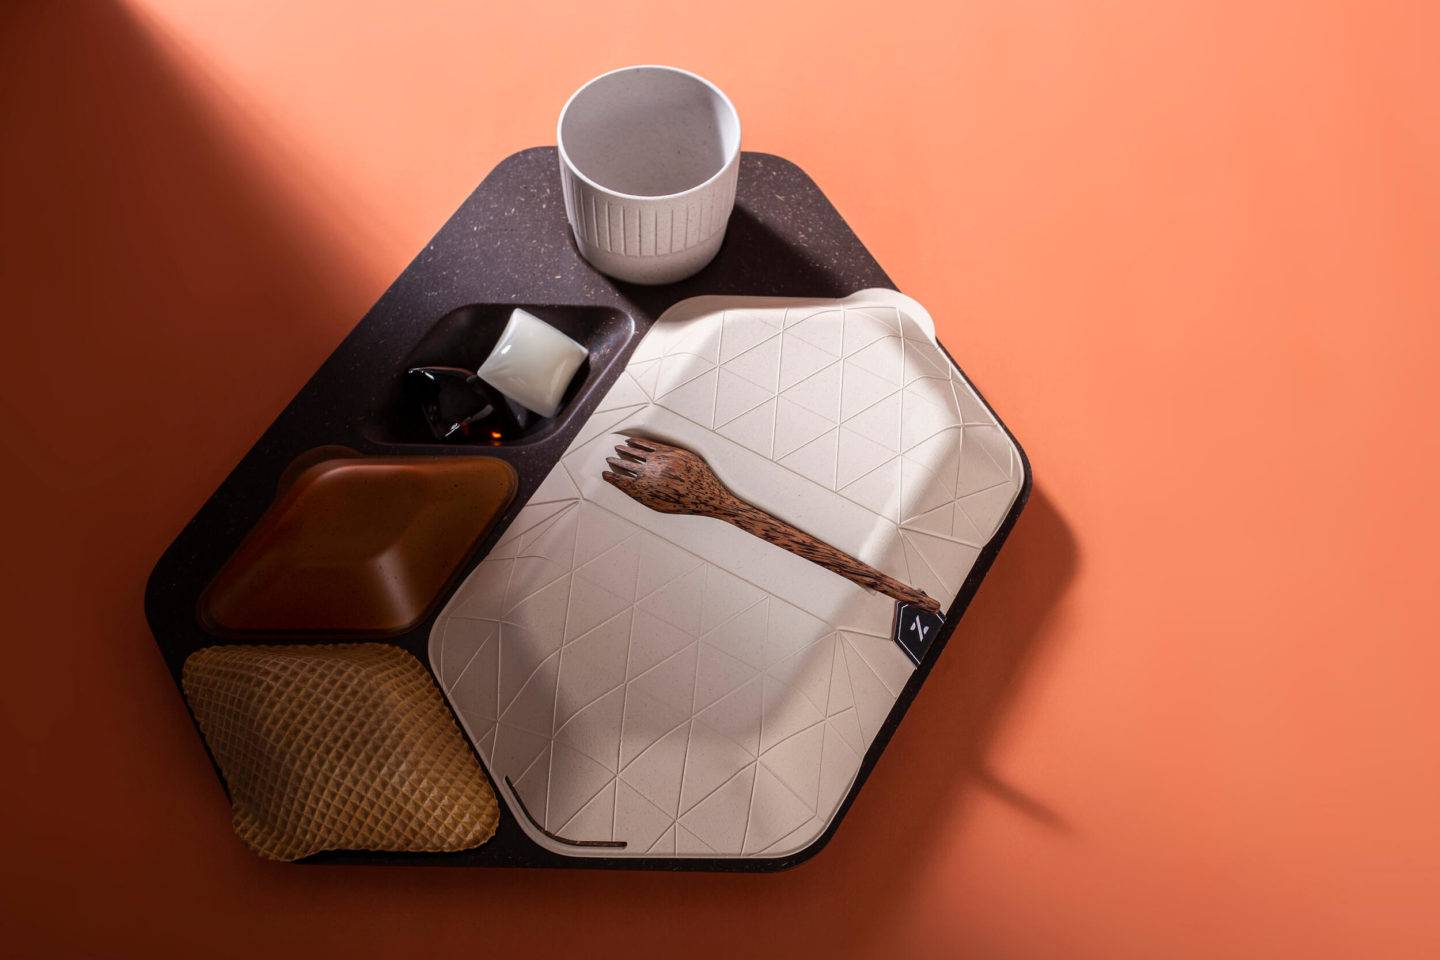 An airline mealtray made of sustainable materials, including wafer biscuit, algae, coffee grounds and coconut wood